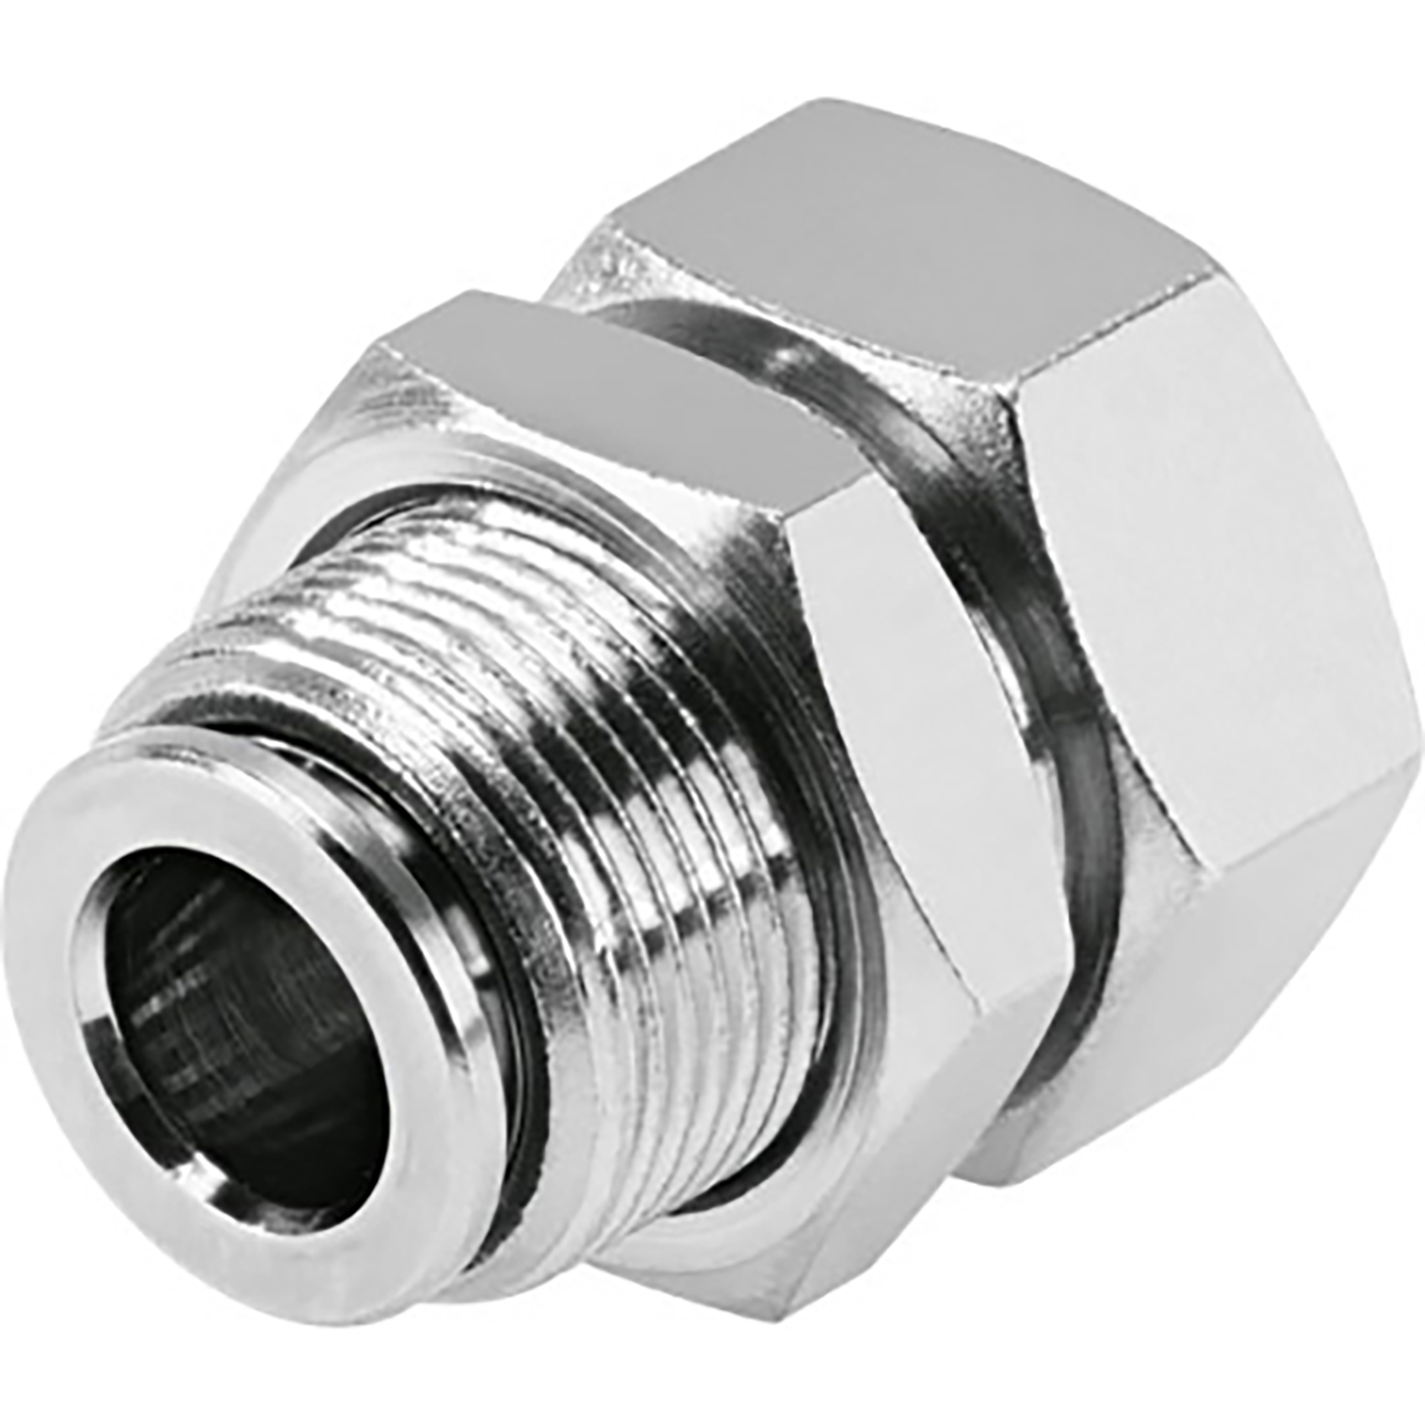 NPQH-H-G18F-Q4-P10 BULKHEAD FITTING sold in multiples of 10 only